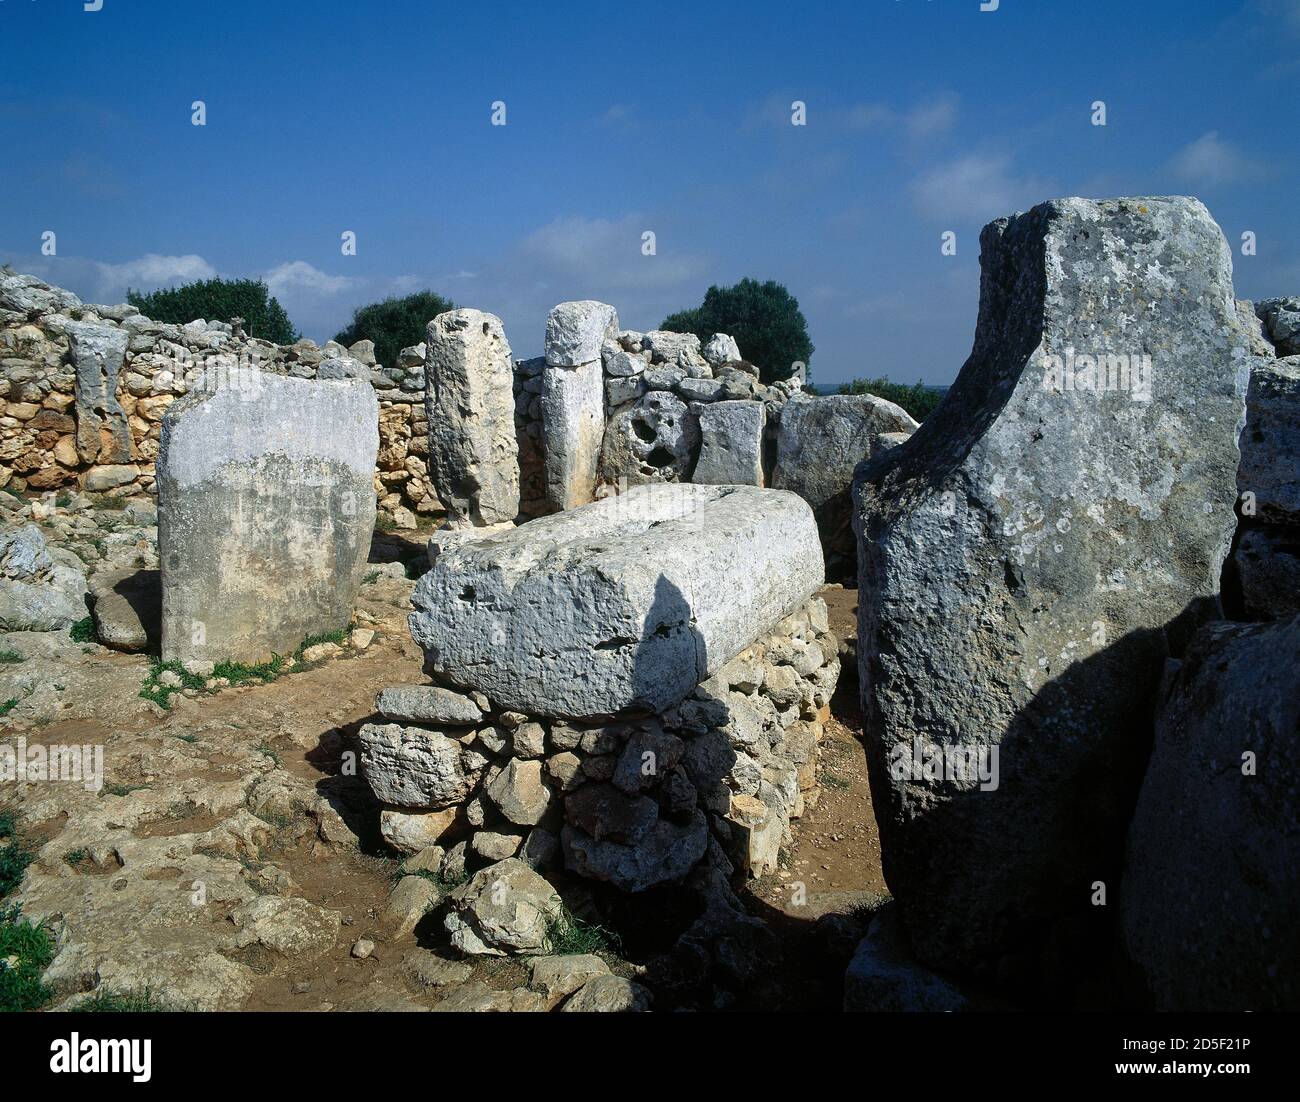 Spain, Balearic Islands, Menorca, Alaior. Torre d'en Galmés talayotic settlement. It was occupied during the Early Bronze Age, around 1600 BC, remaining there until the medieval era. Taula enclosure. Stock Photo